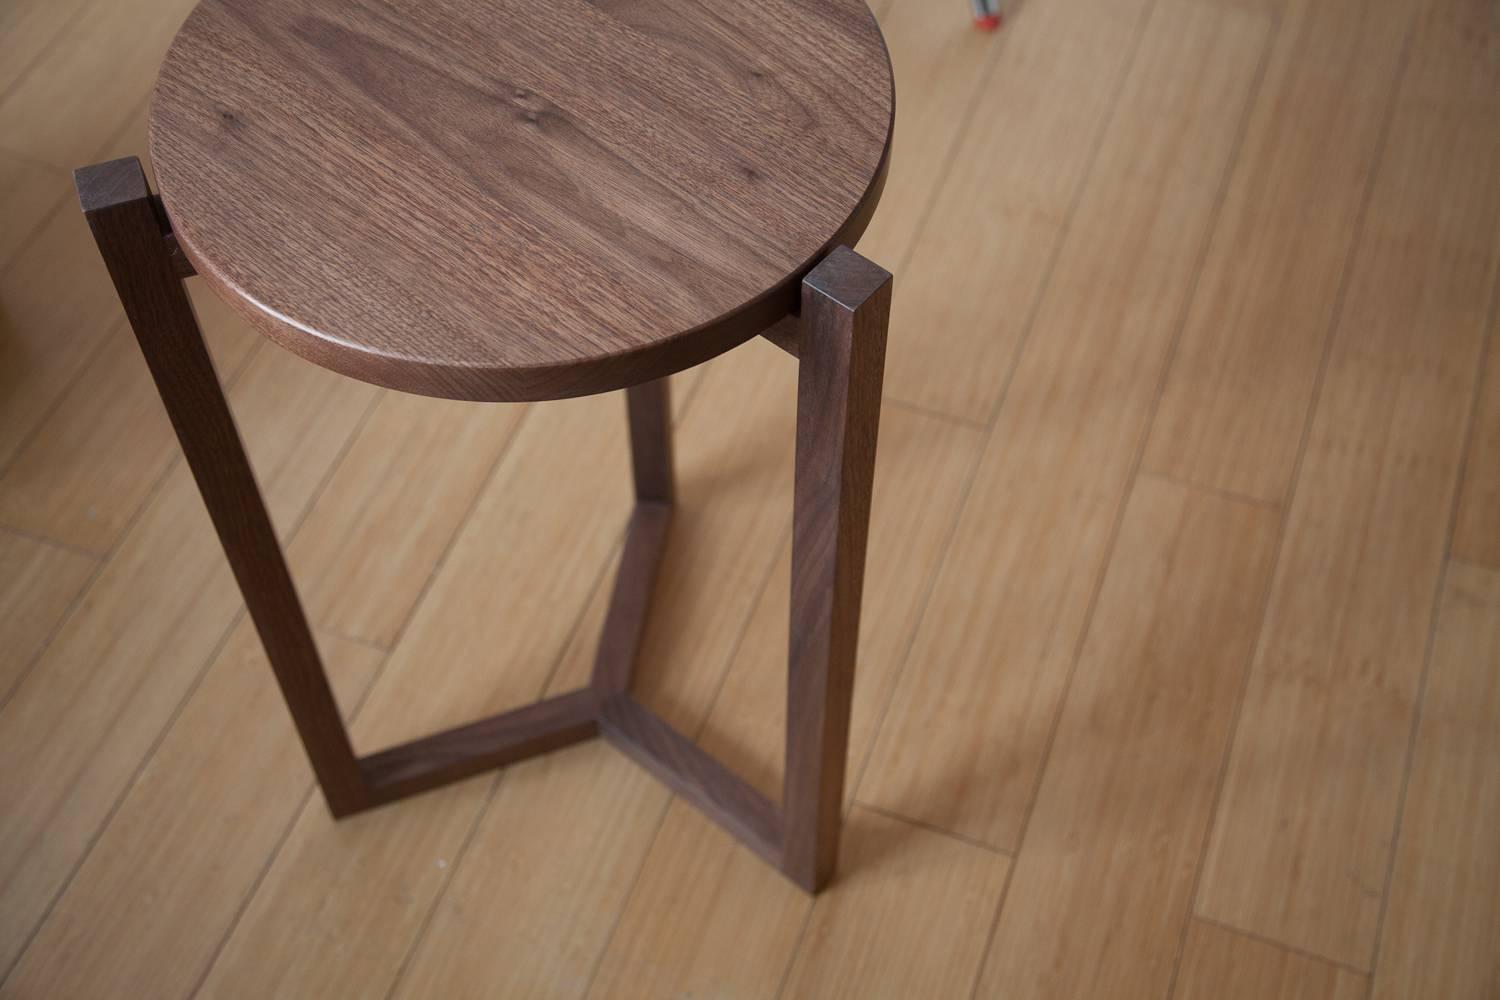 The Felix side table is built in our Louisville, KY studio using premium hardwoods. The three legged design showcases a unique silhouette from any angle, and the three way miter joint provides a functional detail at the base.

Made of solid wood,